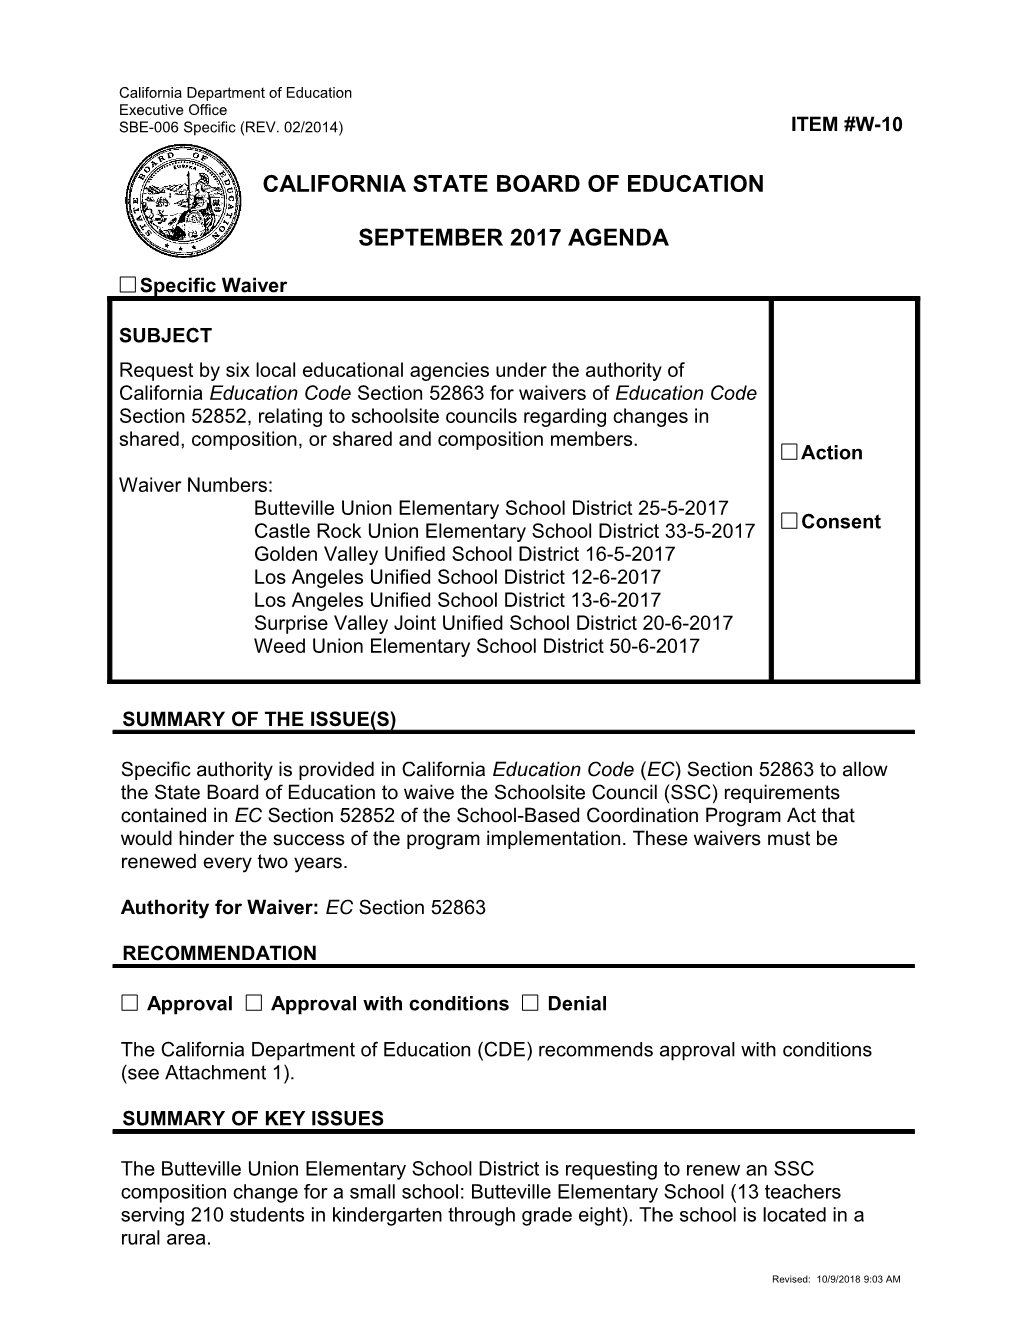 September 2017 Waiver Item W-10 - Meeting Agendas (CA State Board of Education)